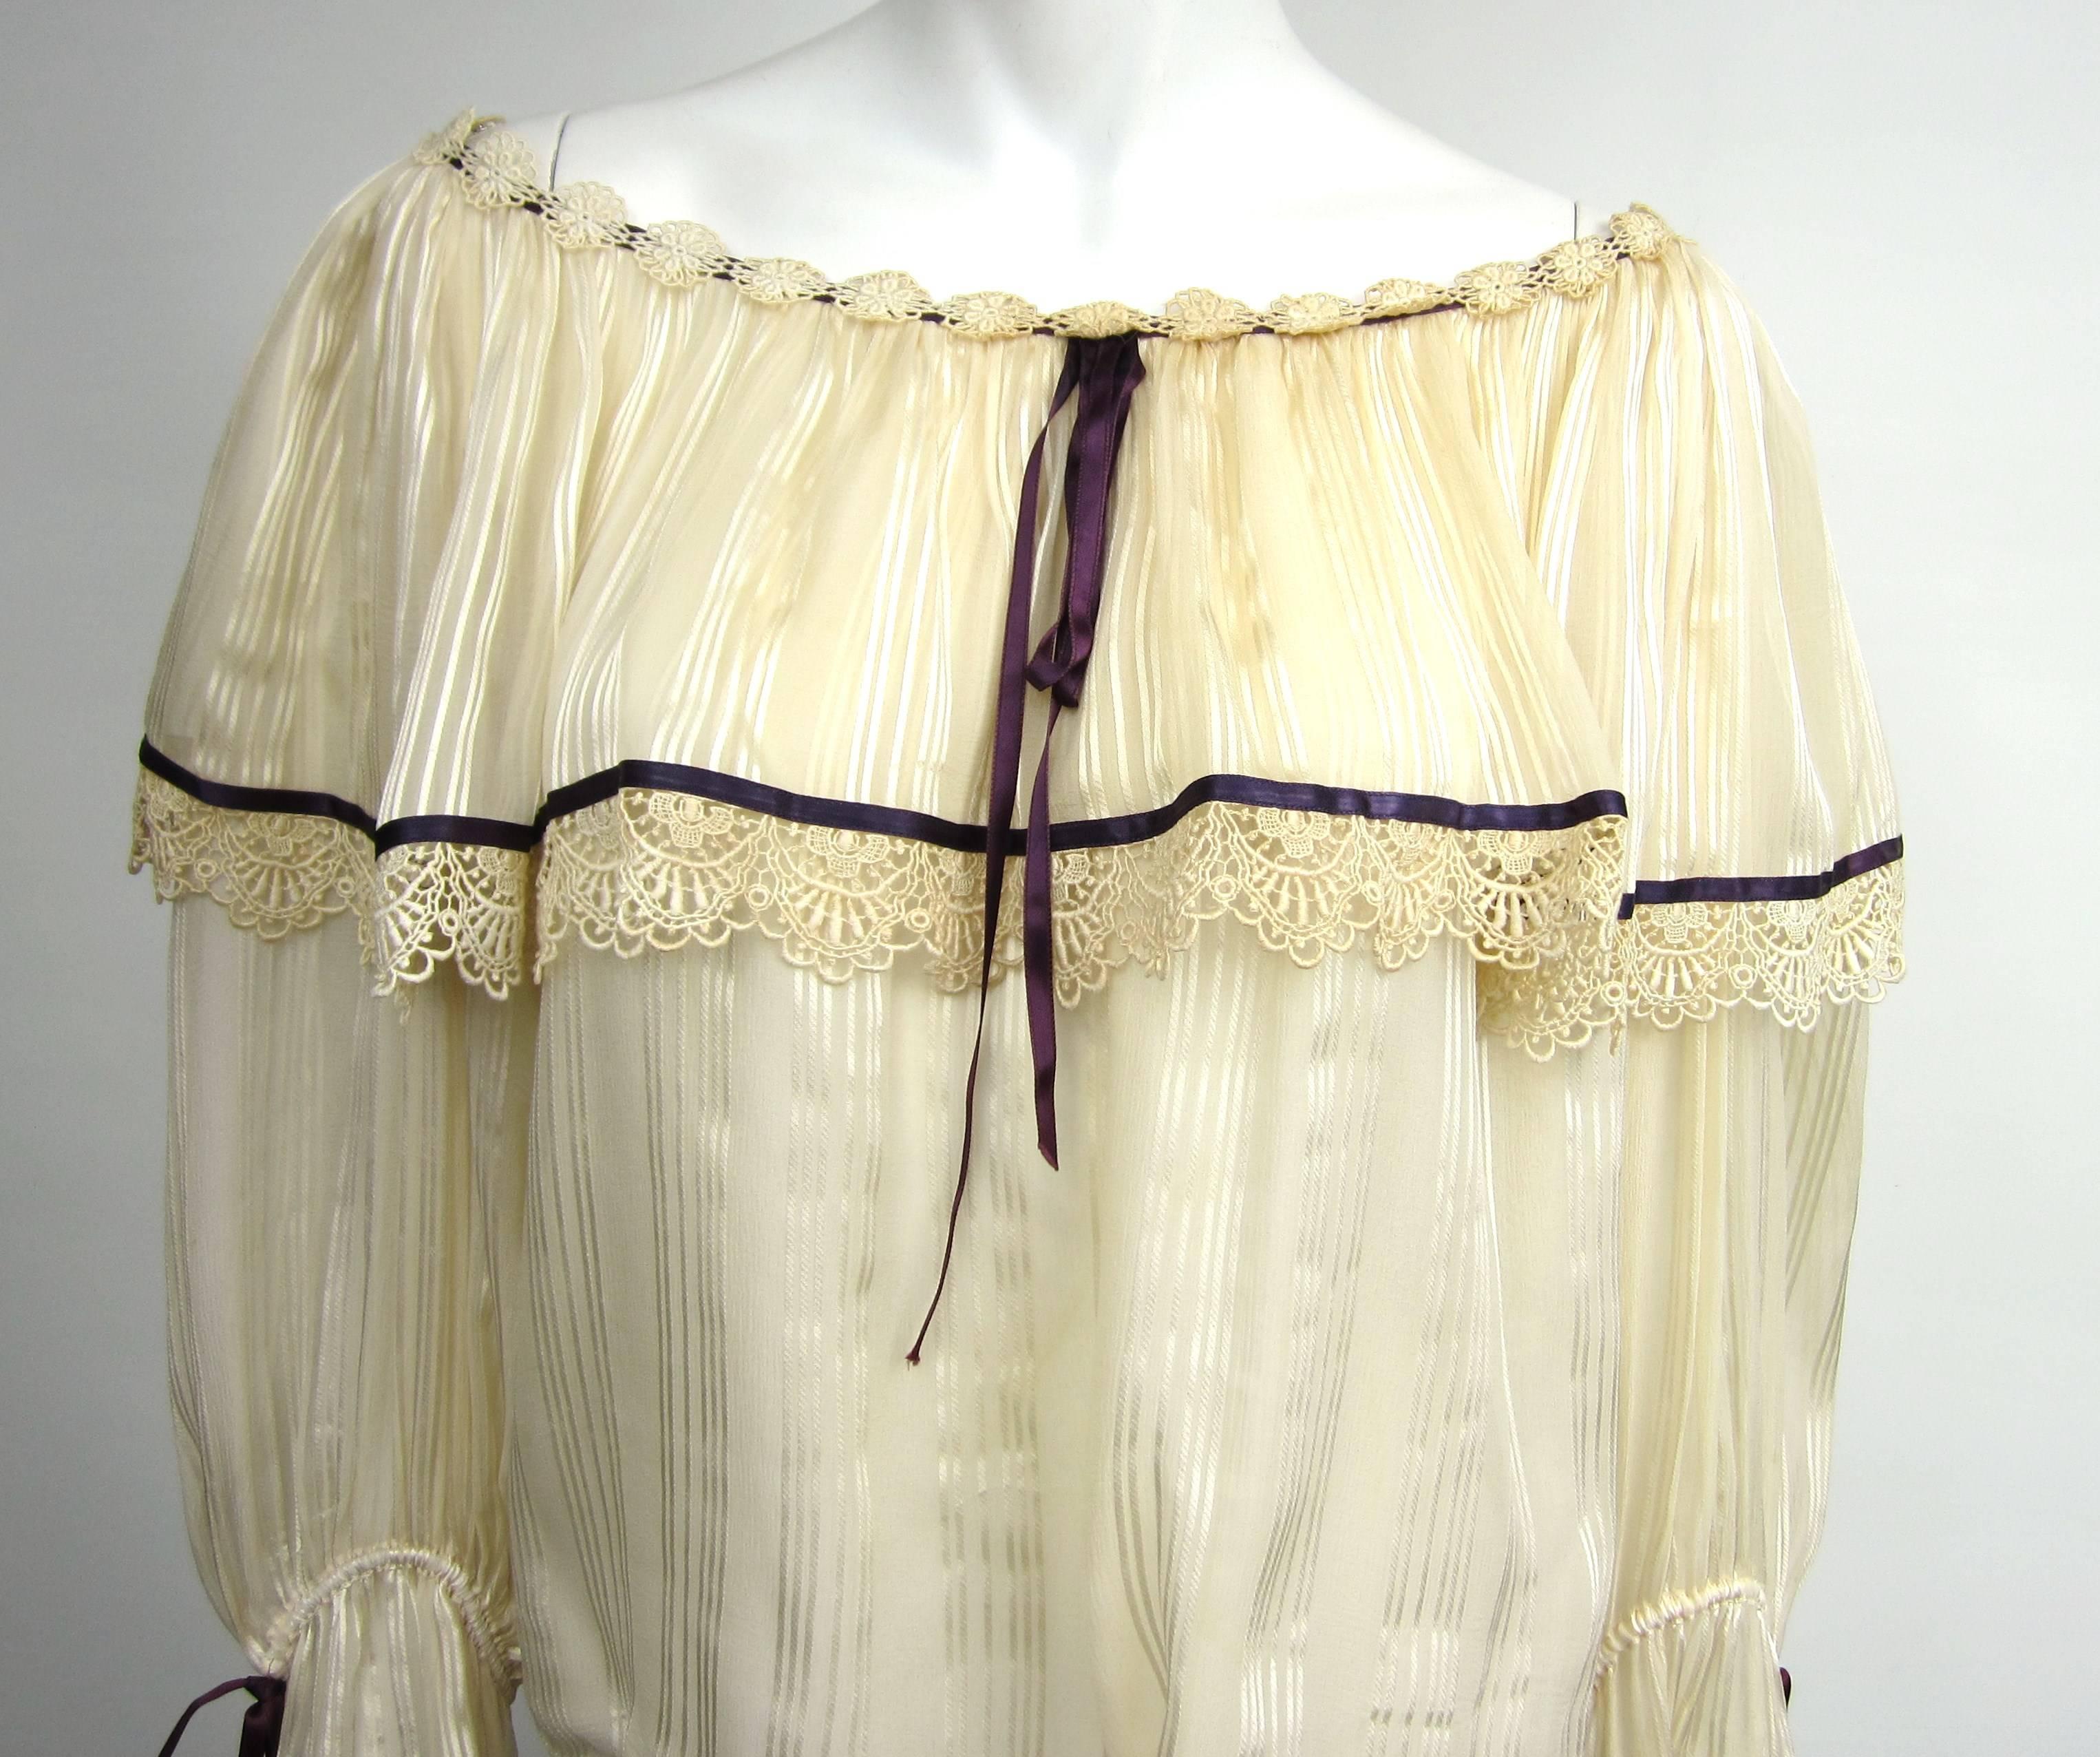 Boho 1970s Numbered YSL Silk Cream / Purple Top
Ribbon accents on the cuff. Large Ruffle on the bodice 
Lace across the shoulders 
Numbered 41467
Measuring 
Up to 42